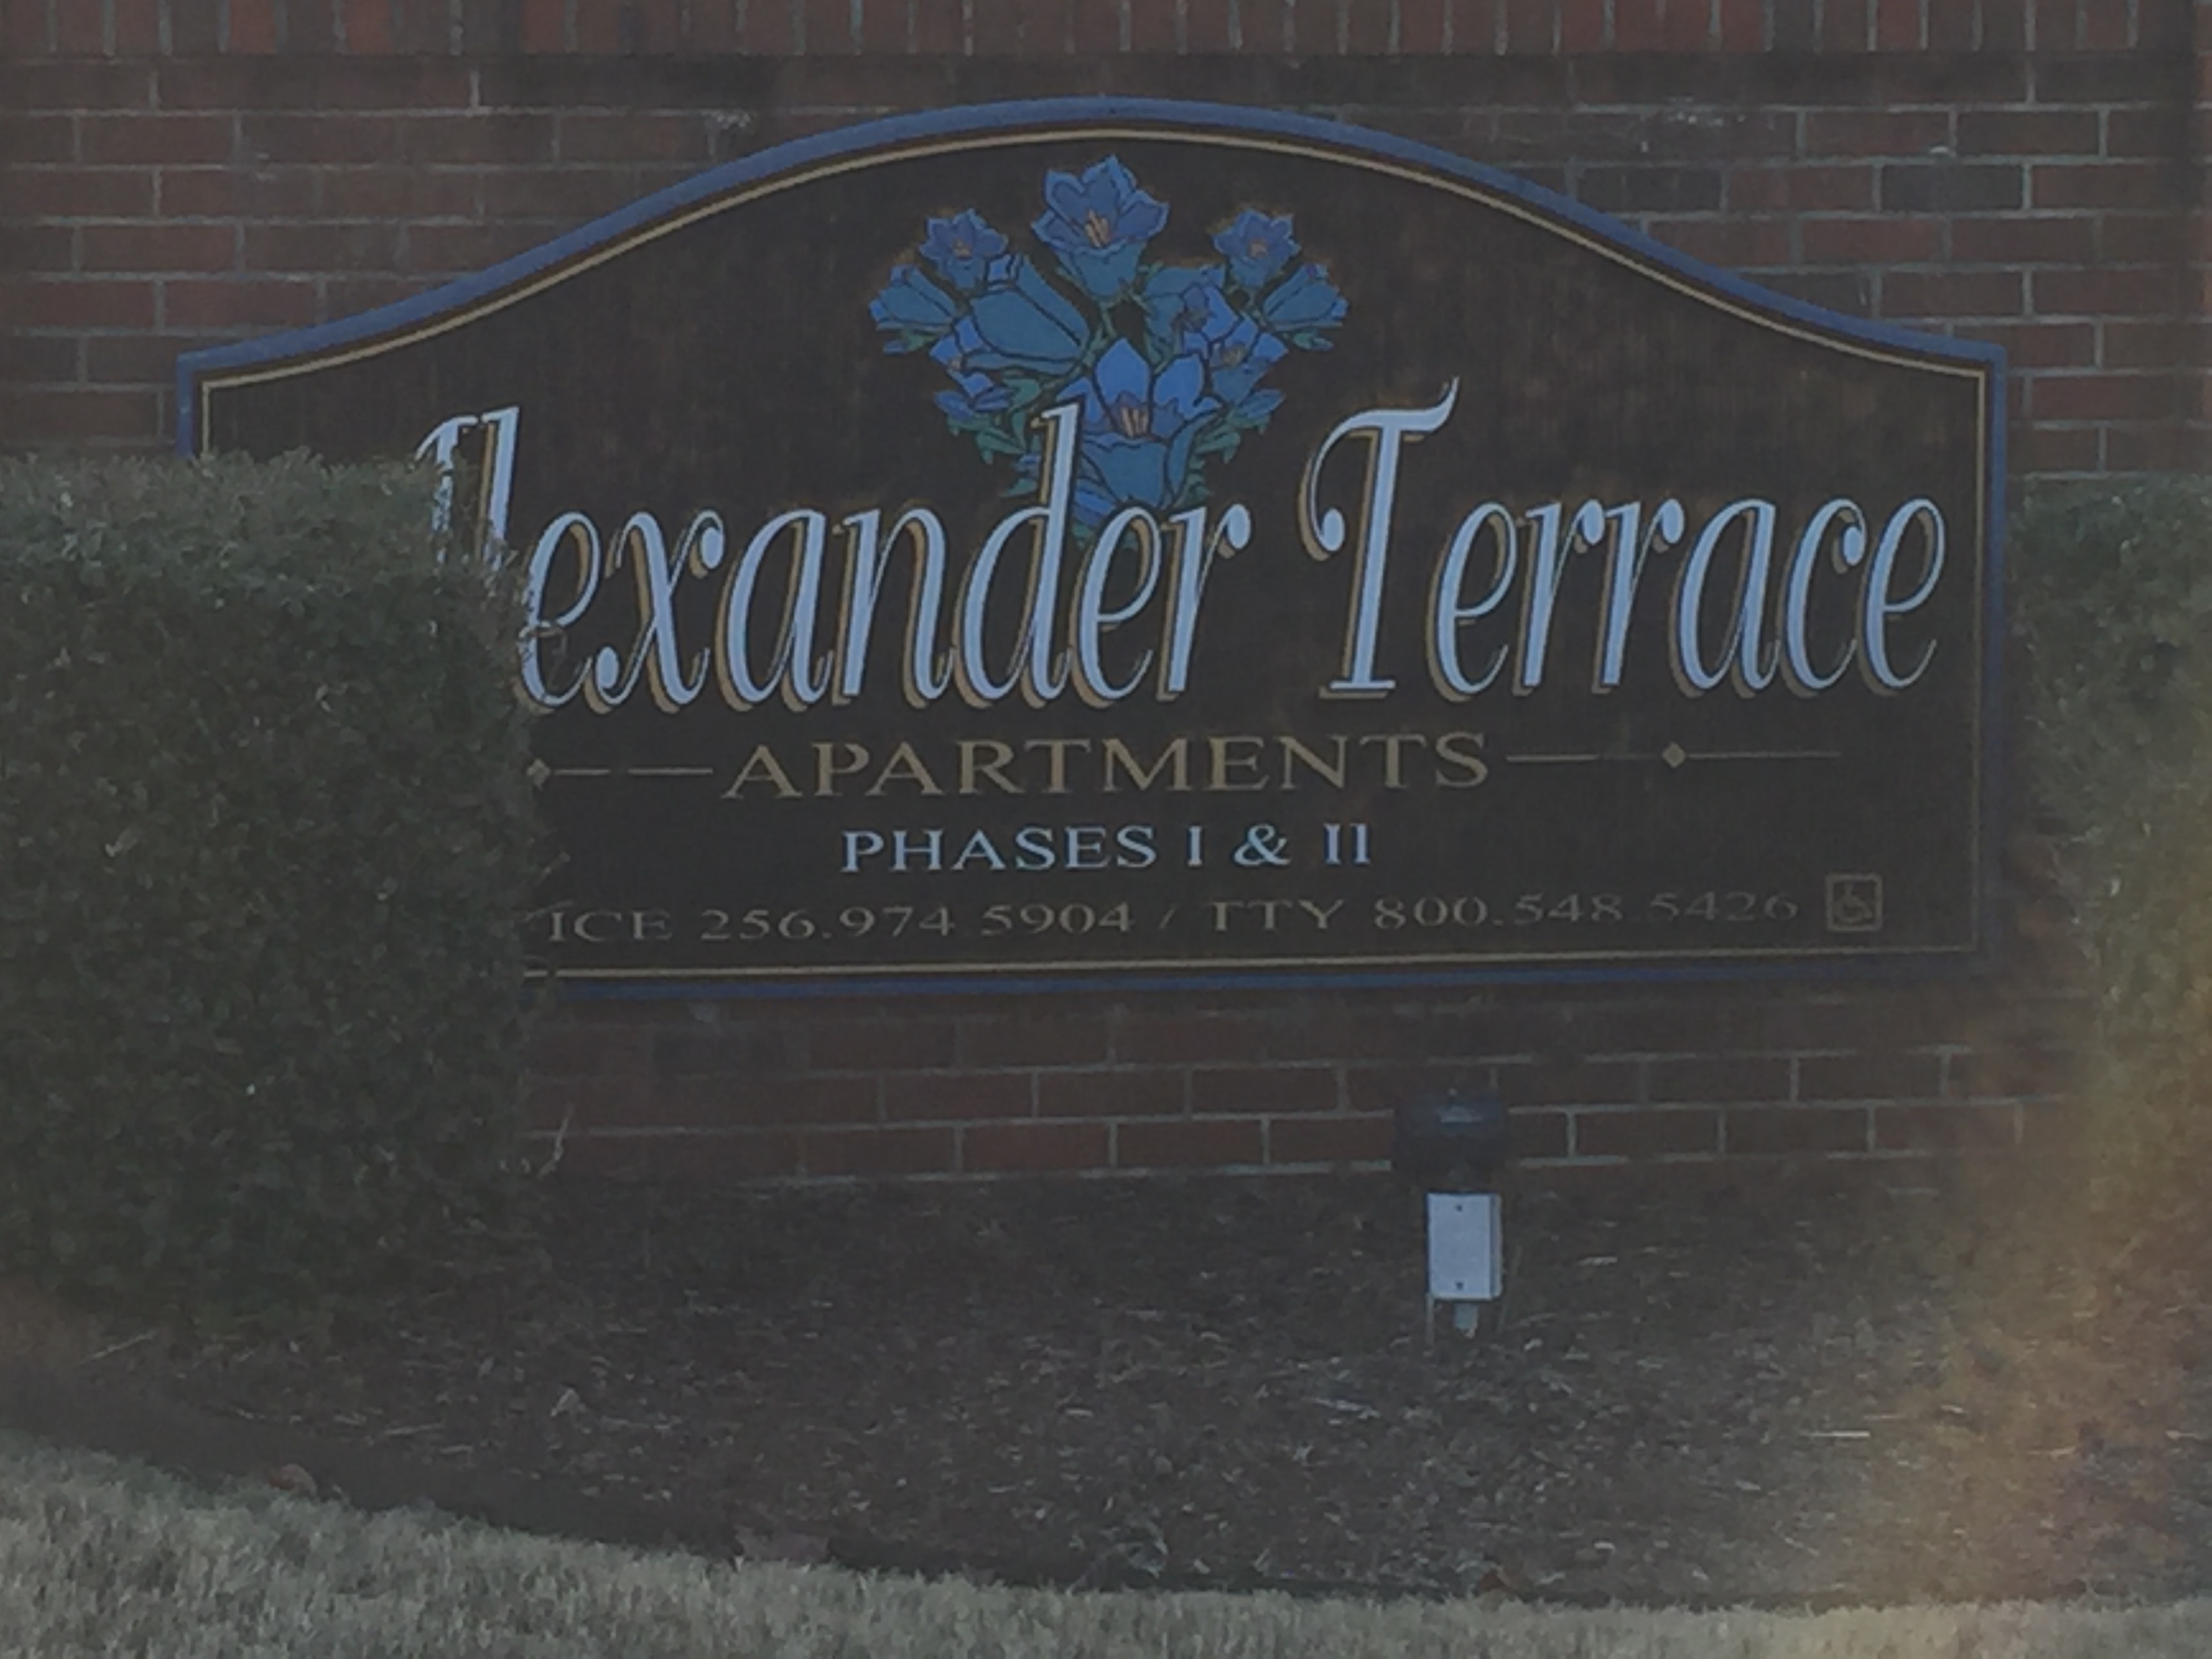 Alexander Terrace 1 and 2 [Lawrence County]